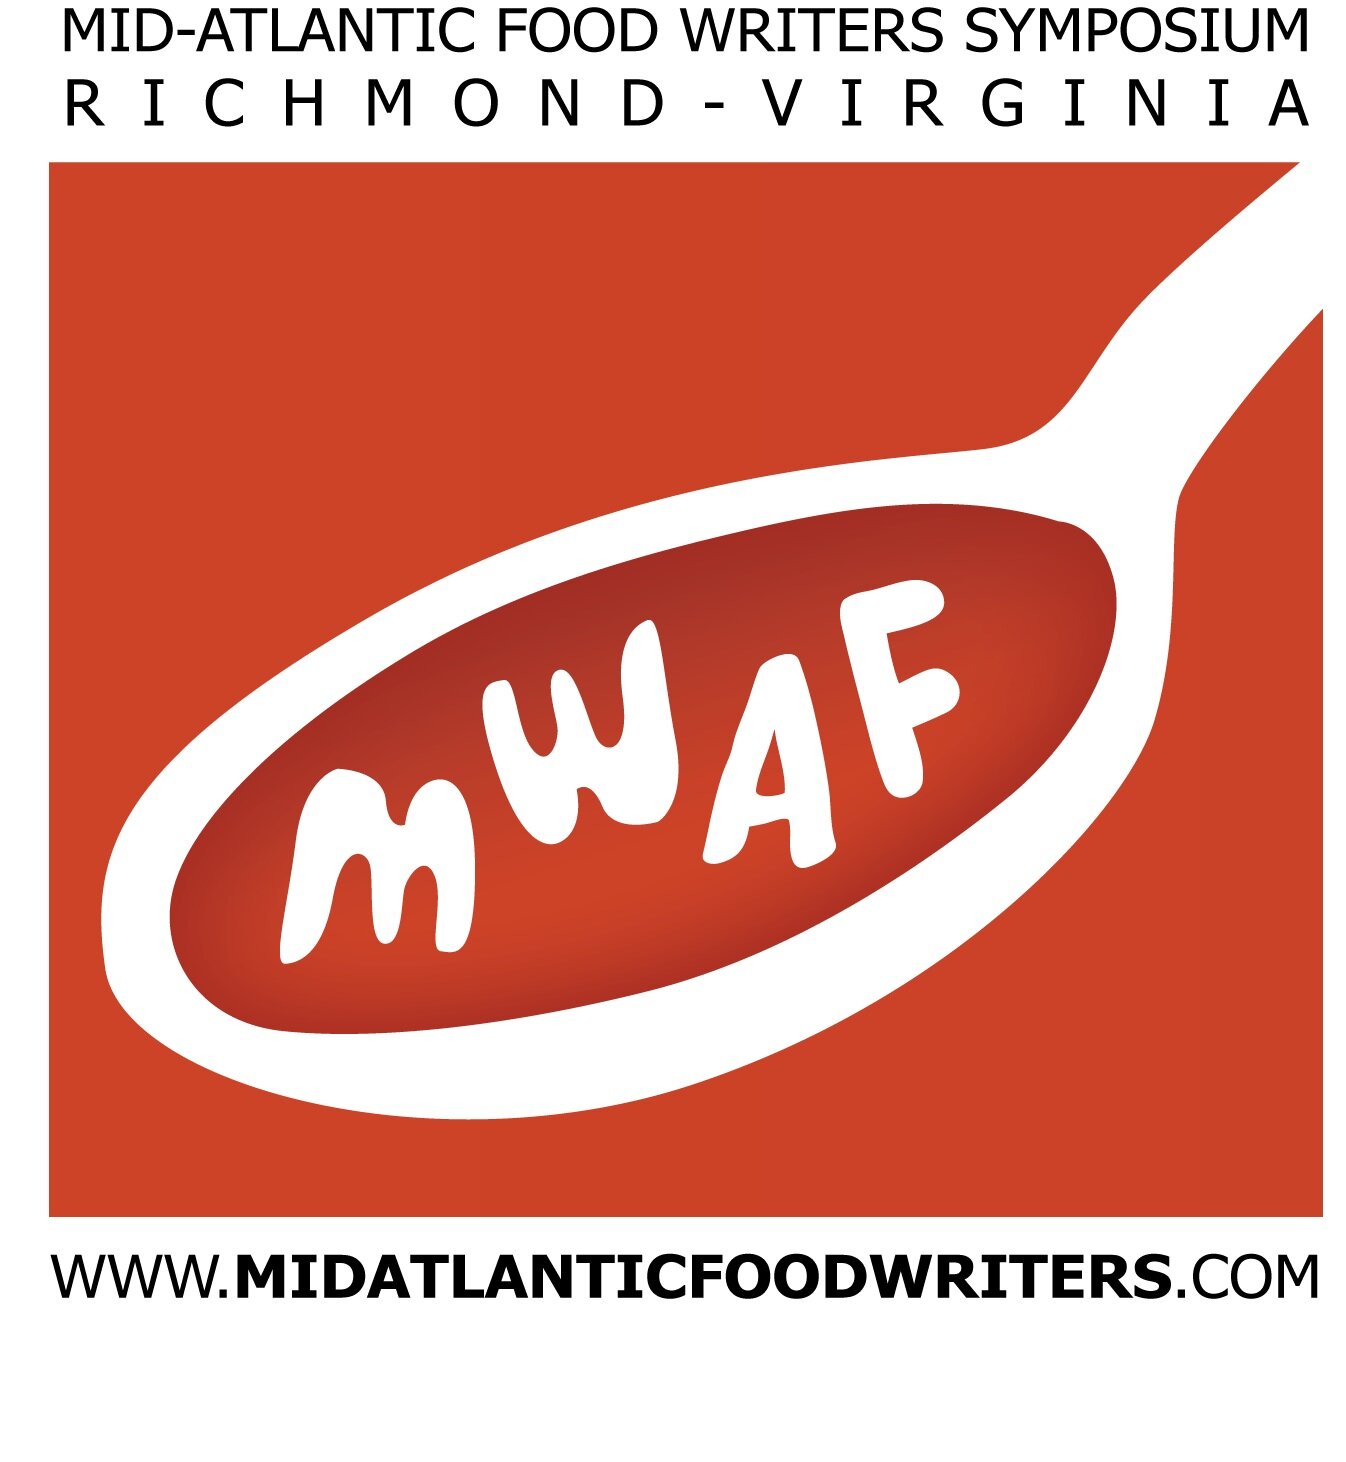 Richmond, VA! Filling the void for a food writers conference & networking event in the Mid-Atlantic. From Real Richmond & Patrick Evans-Hylton.